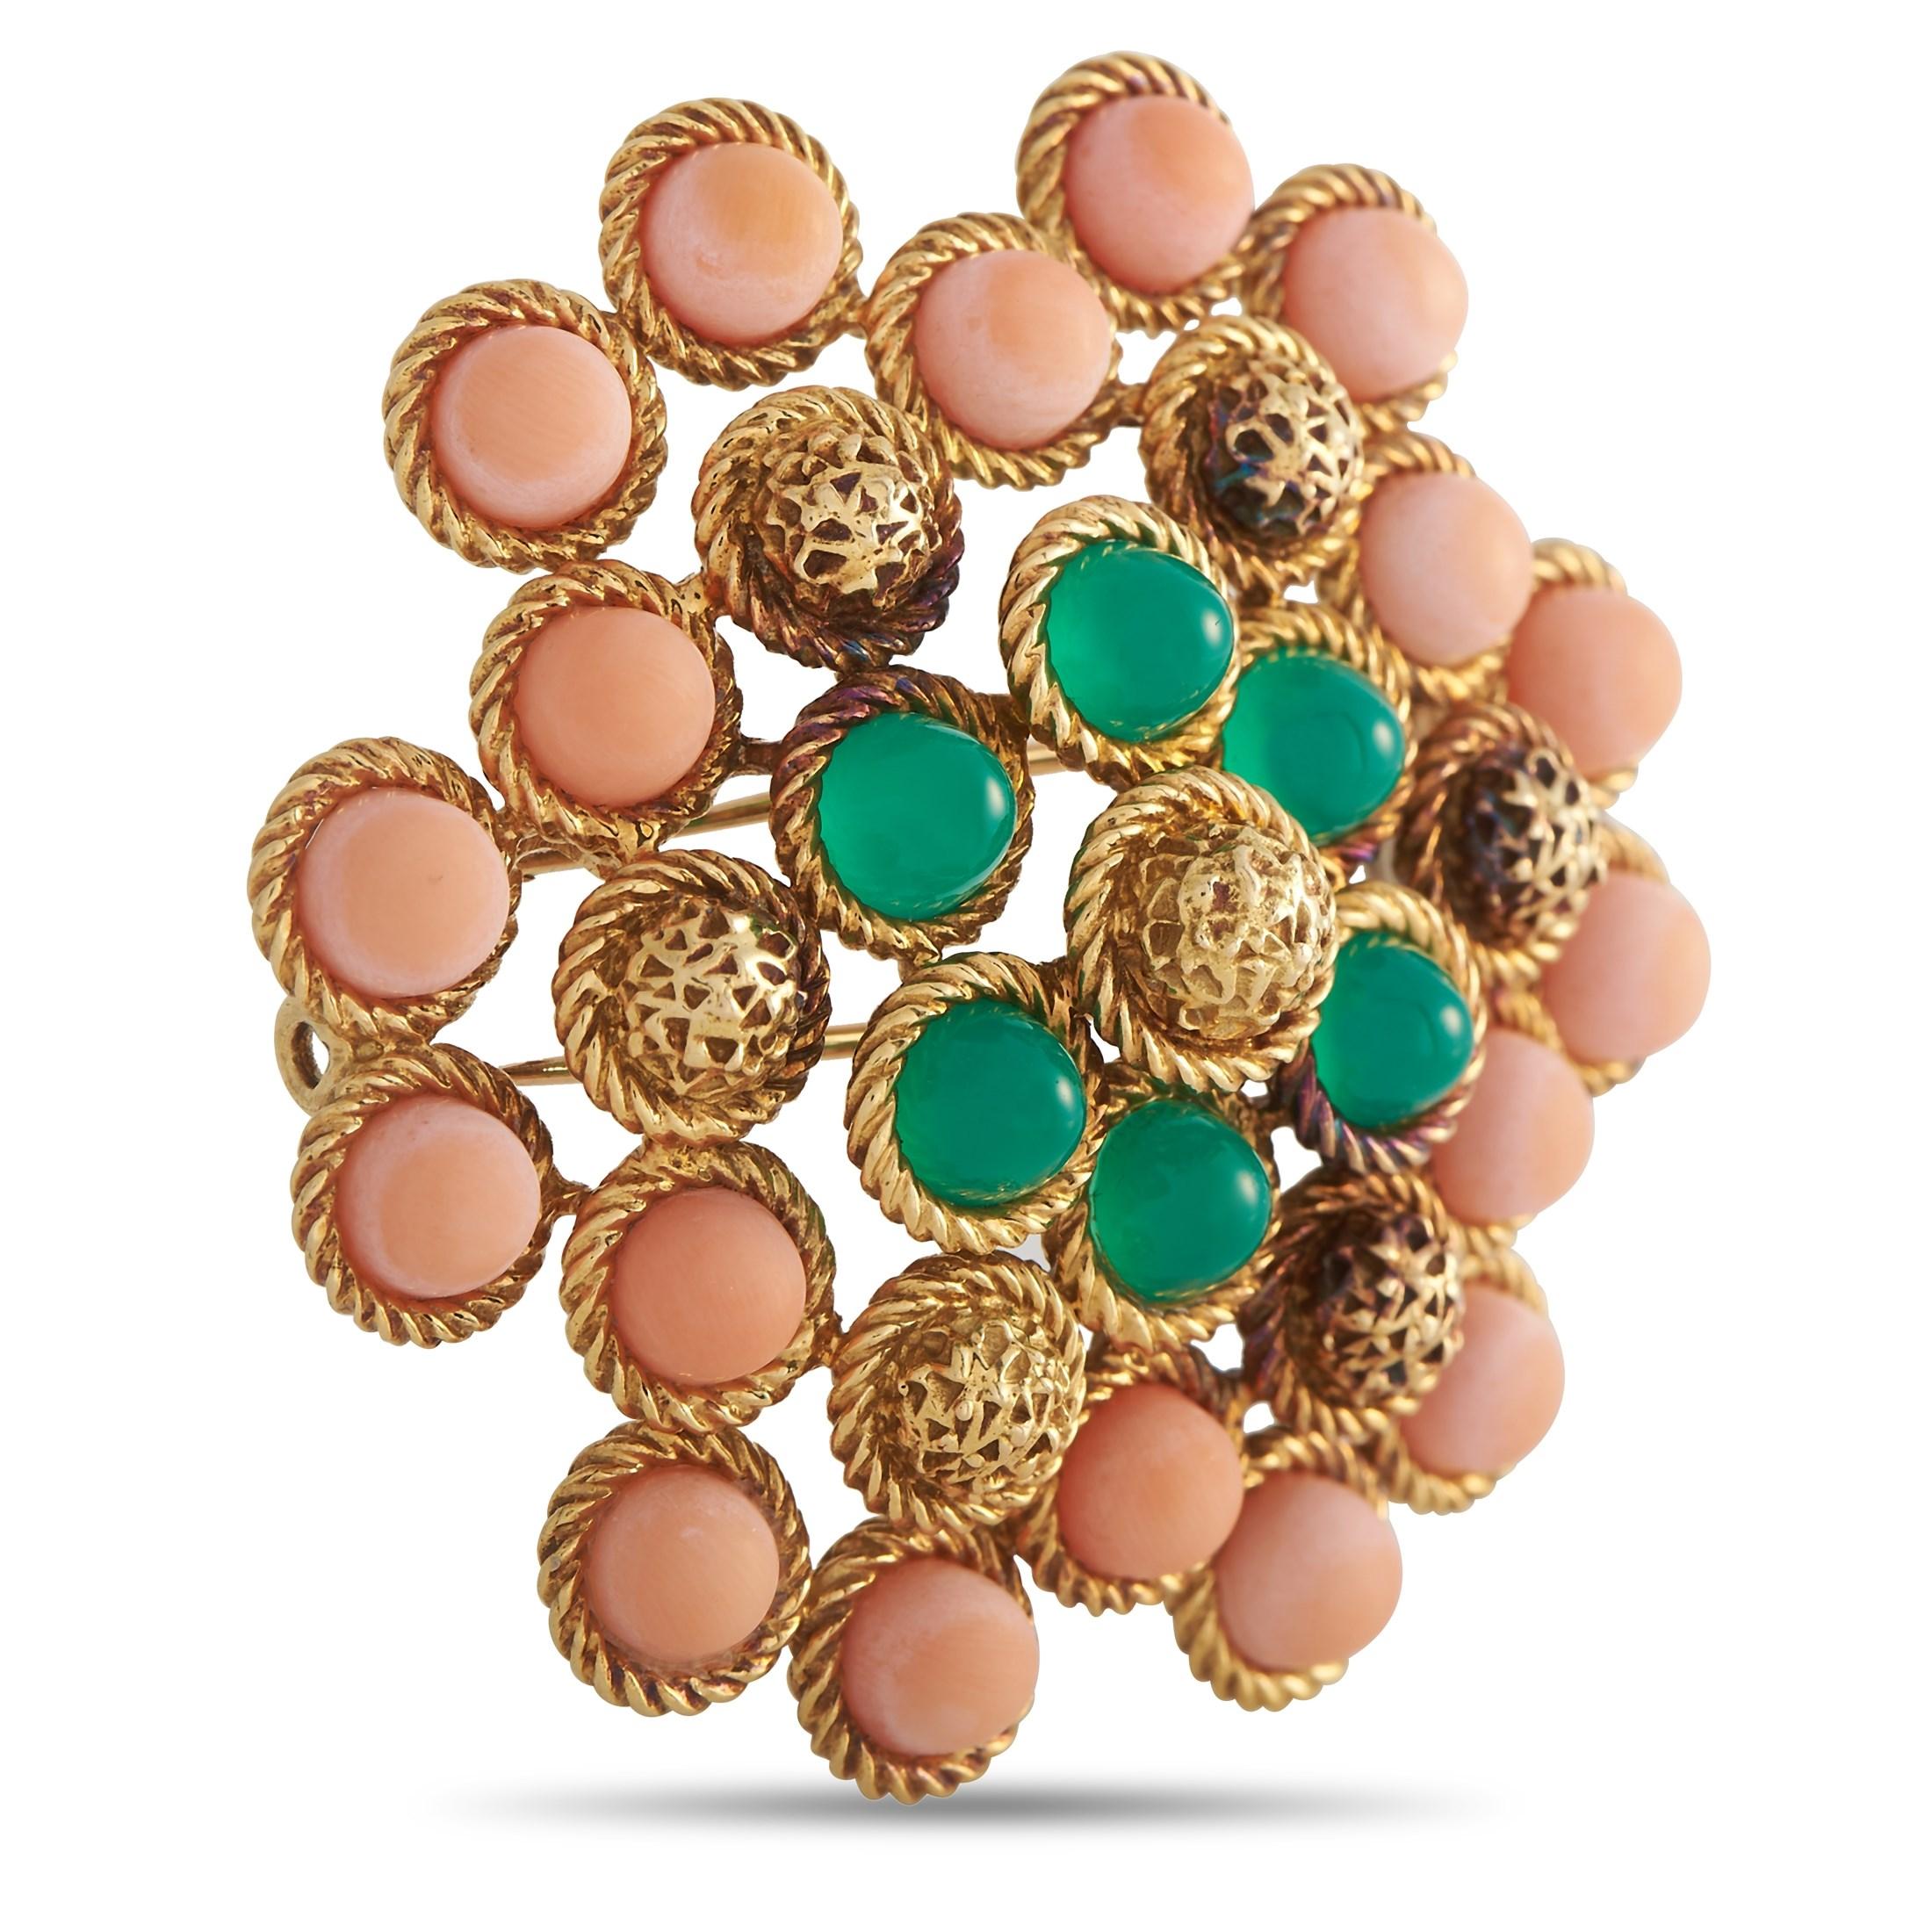 Bold colors and textures come together in perfect harmony on this luxurious vintage Van Cleef & Arpels brooch. Opulent 18K Yellow Gold metalwork provides the perfect foundation for this piece’s stunning arrangement of Coral and Chrysoprase